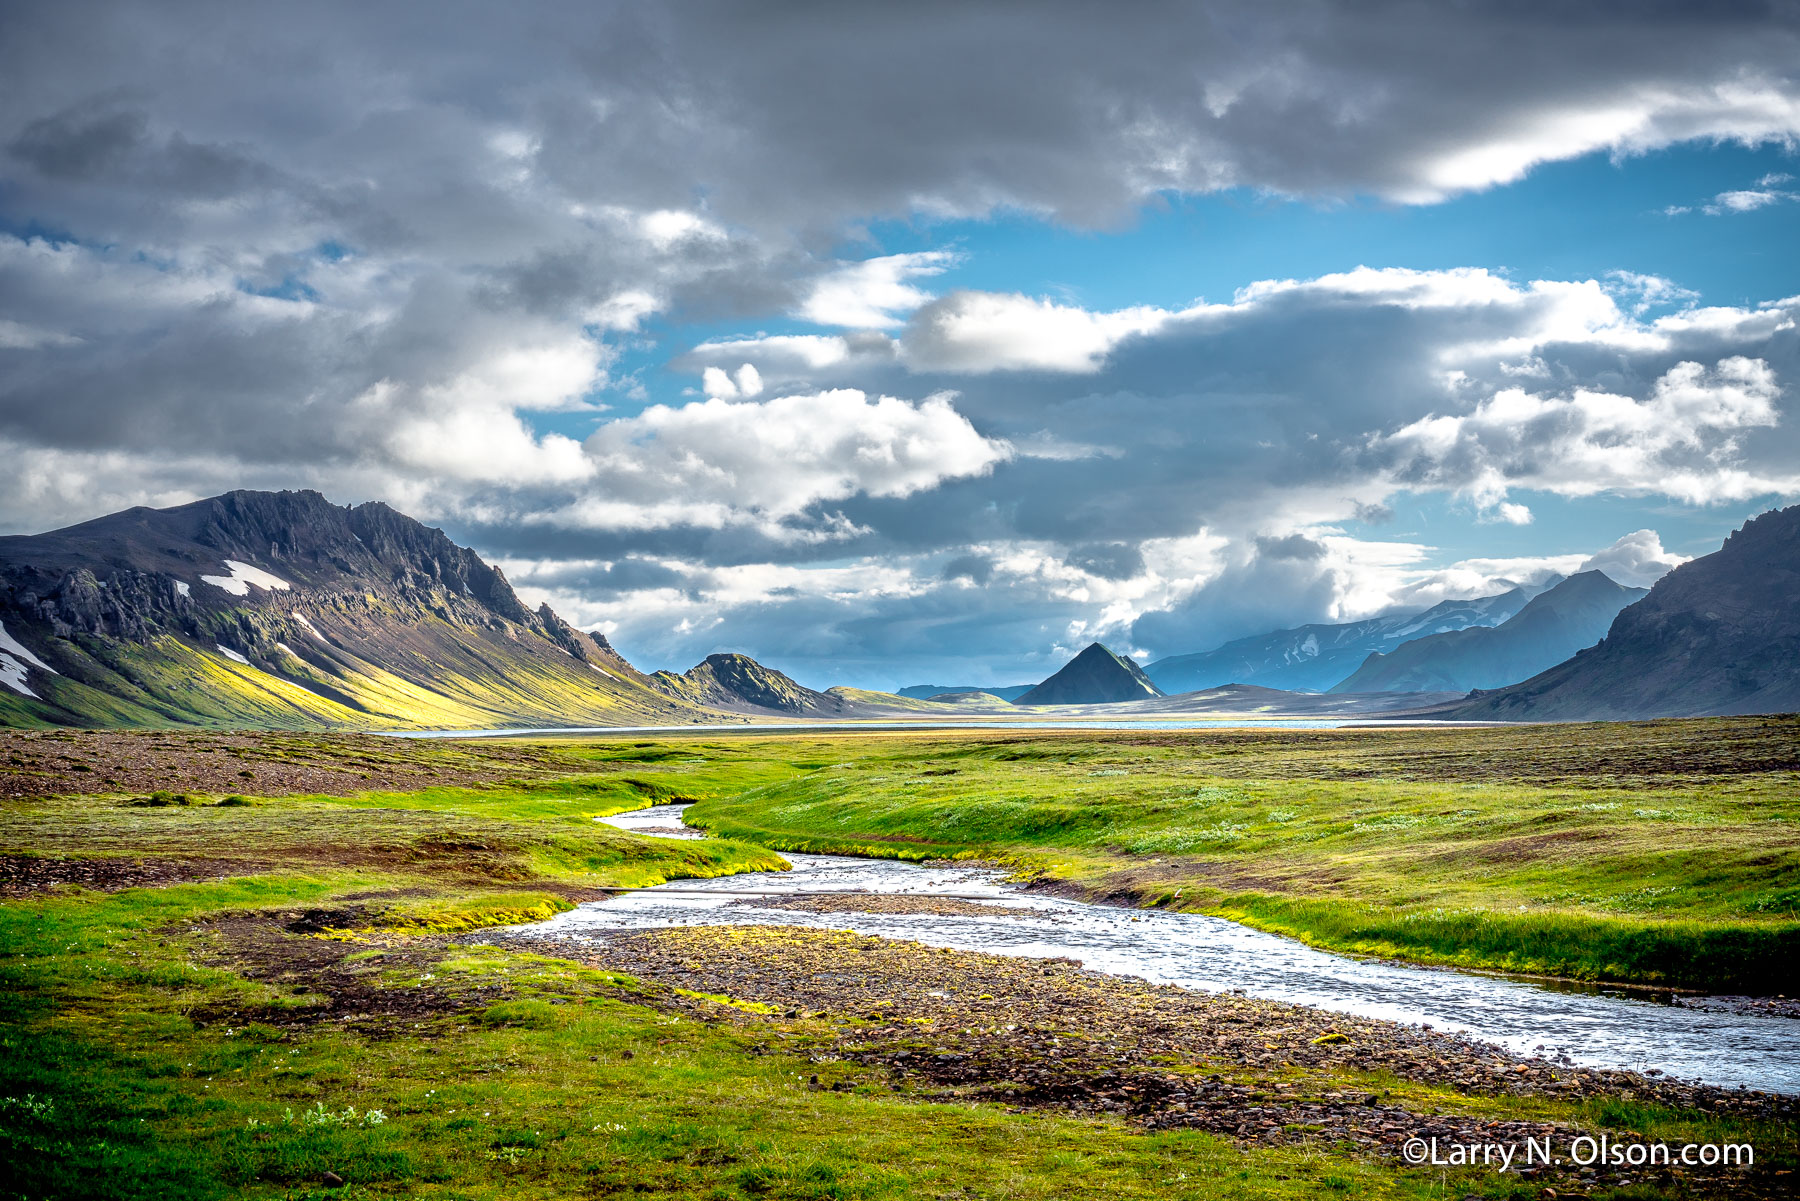 Approaching  Alftavatn, Iceland | Creek cuts through valley floor in Iceland valley.